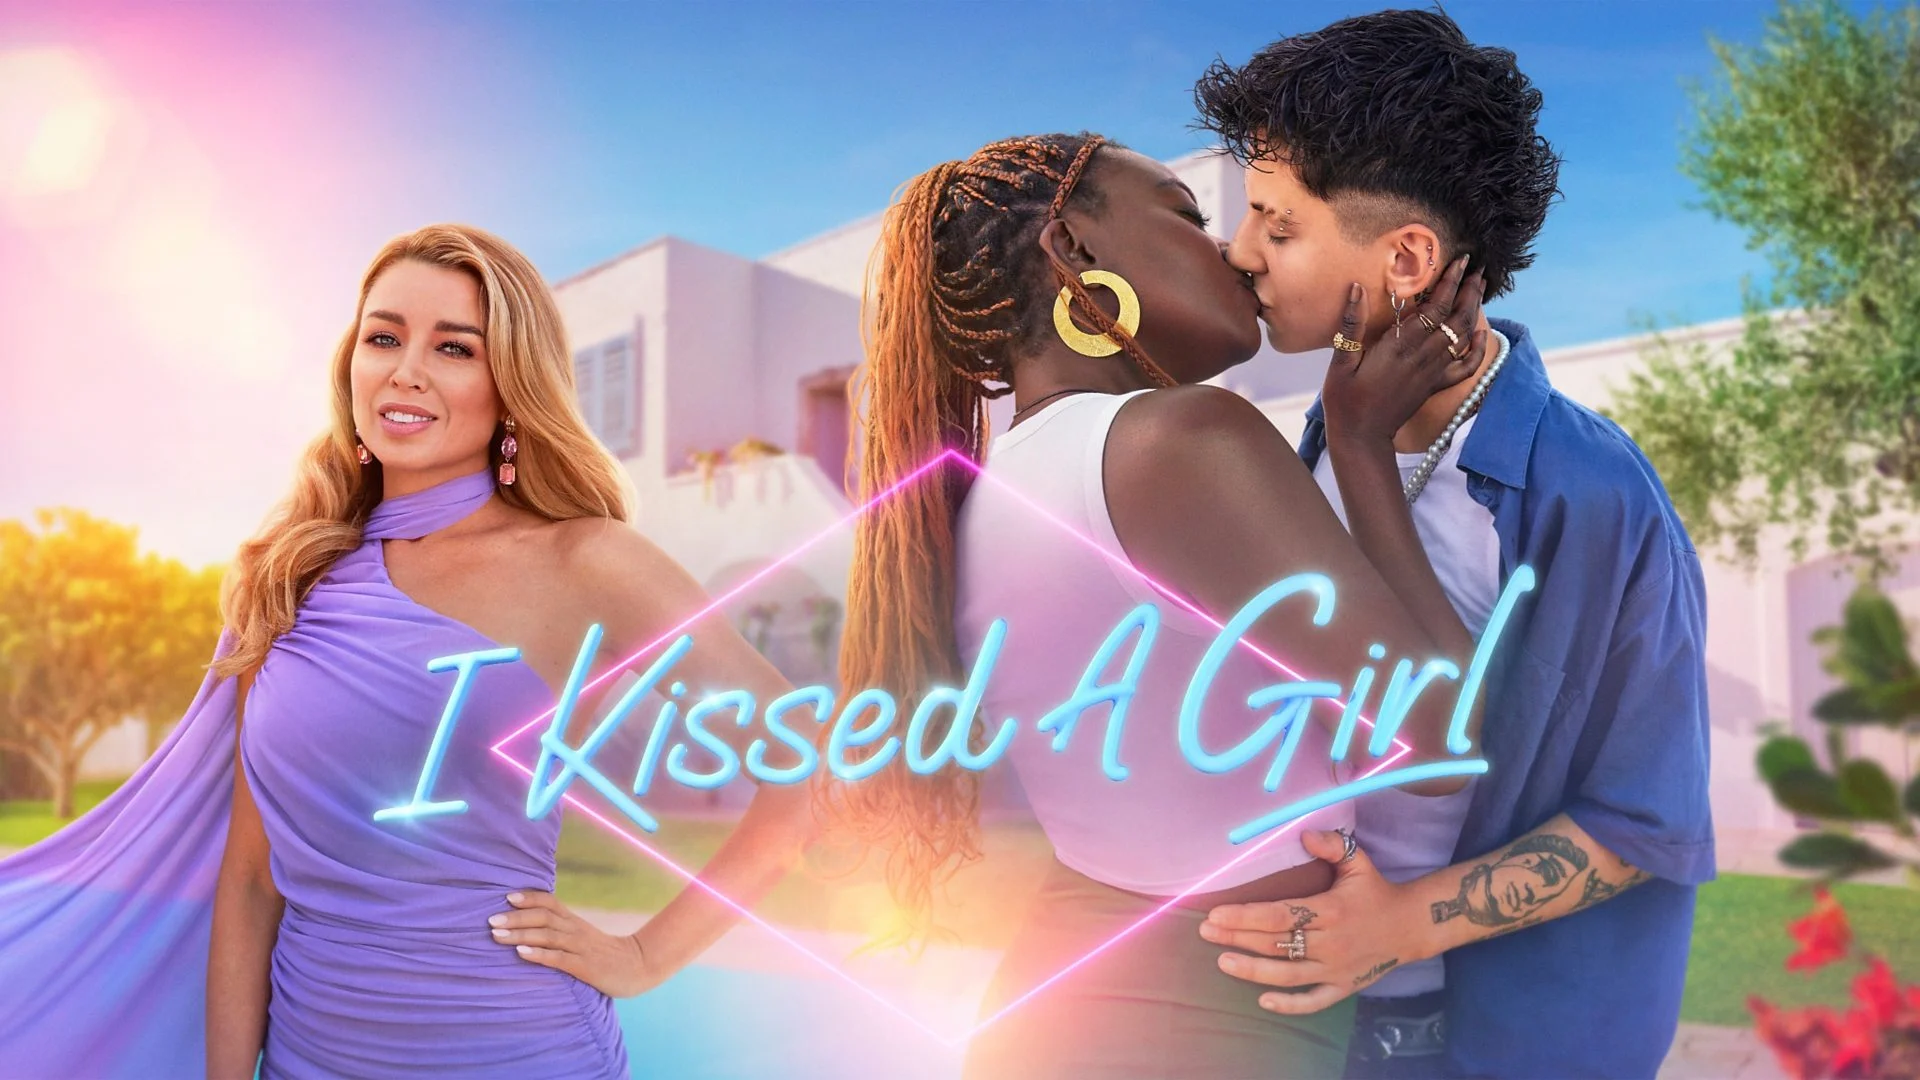 Where to Watch I Kissed a Girl Online